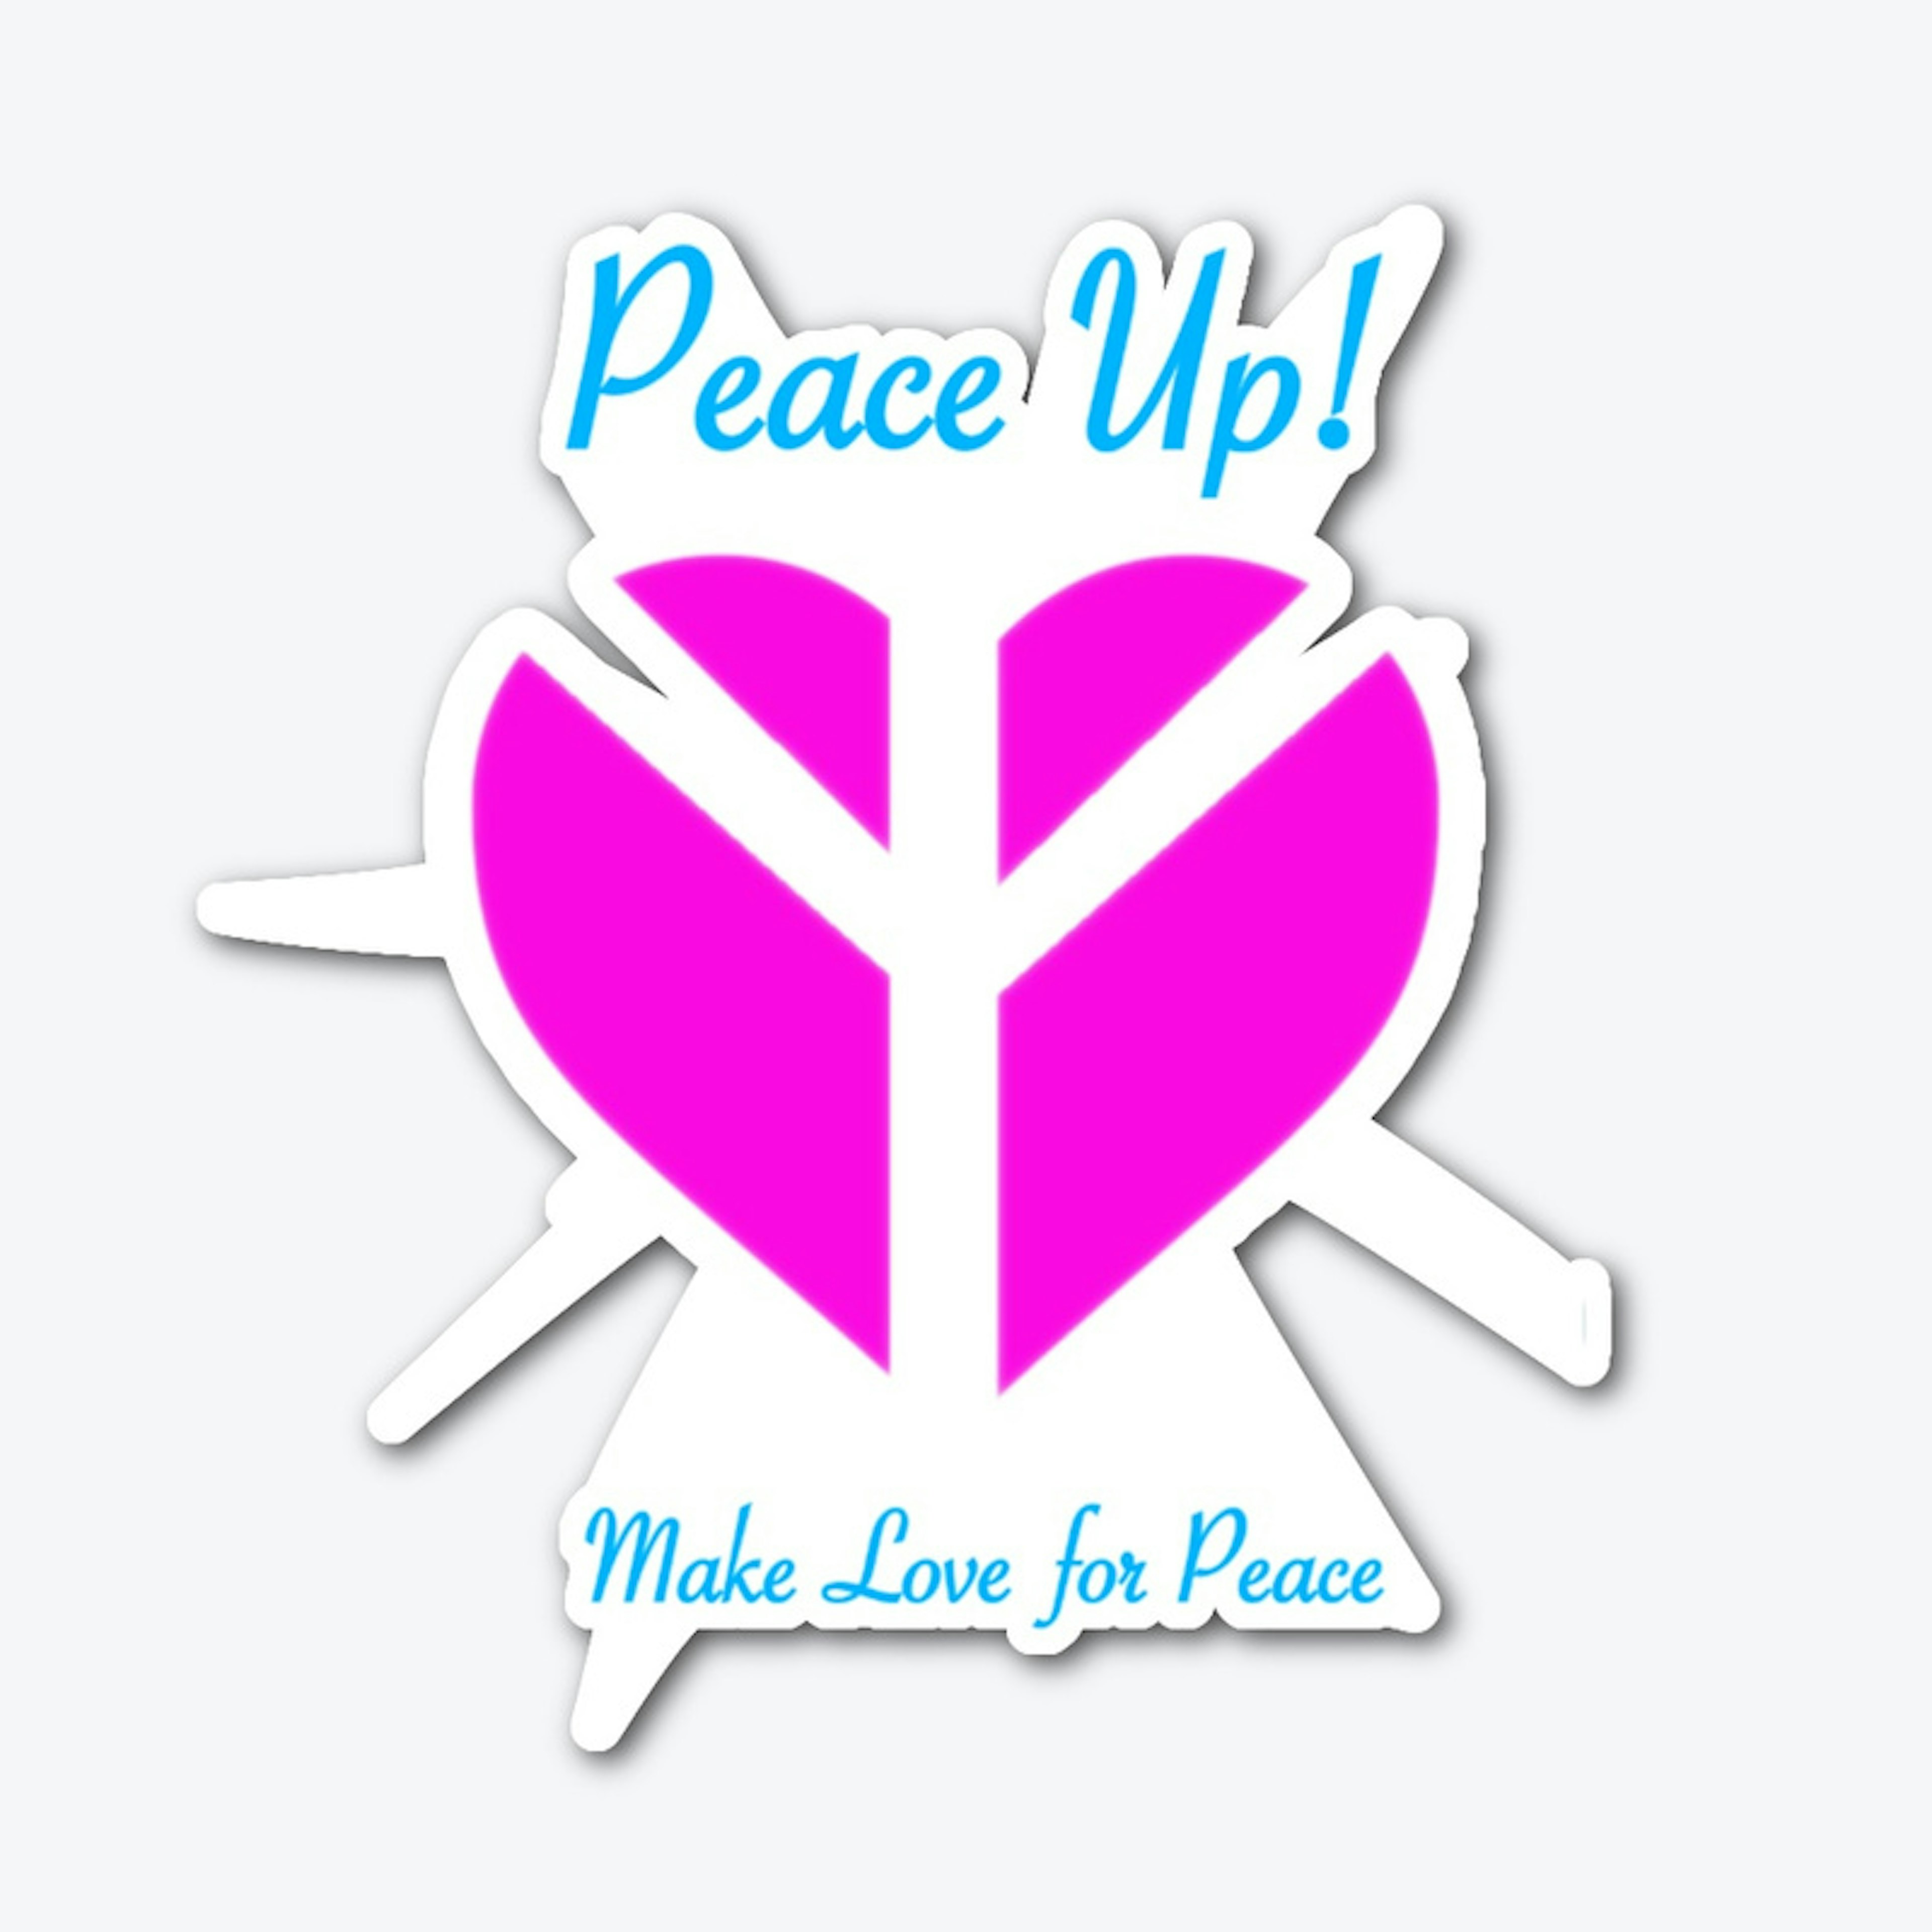 Make Love for Peace